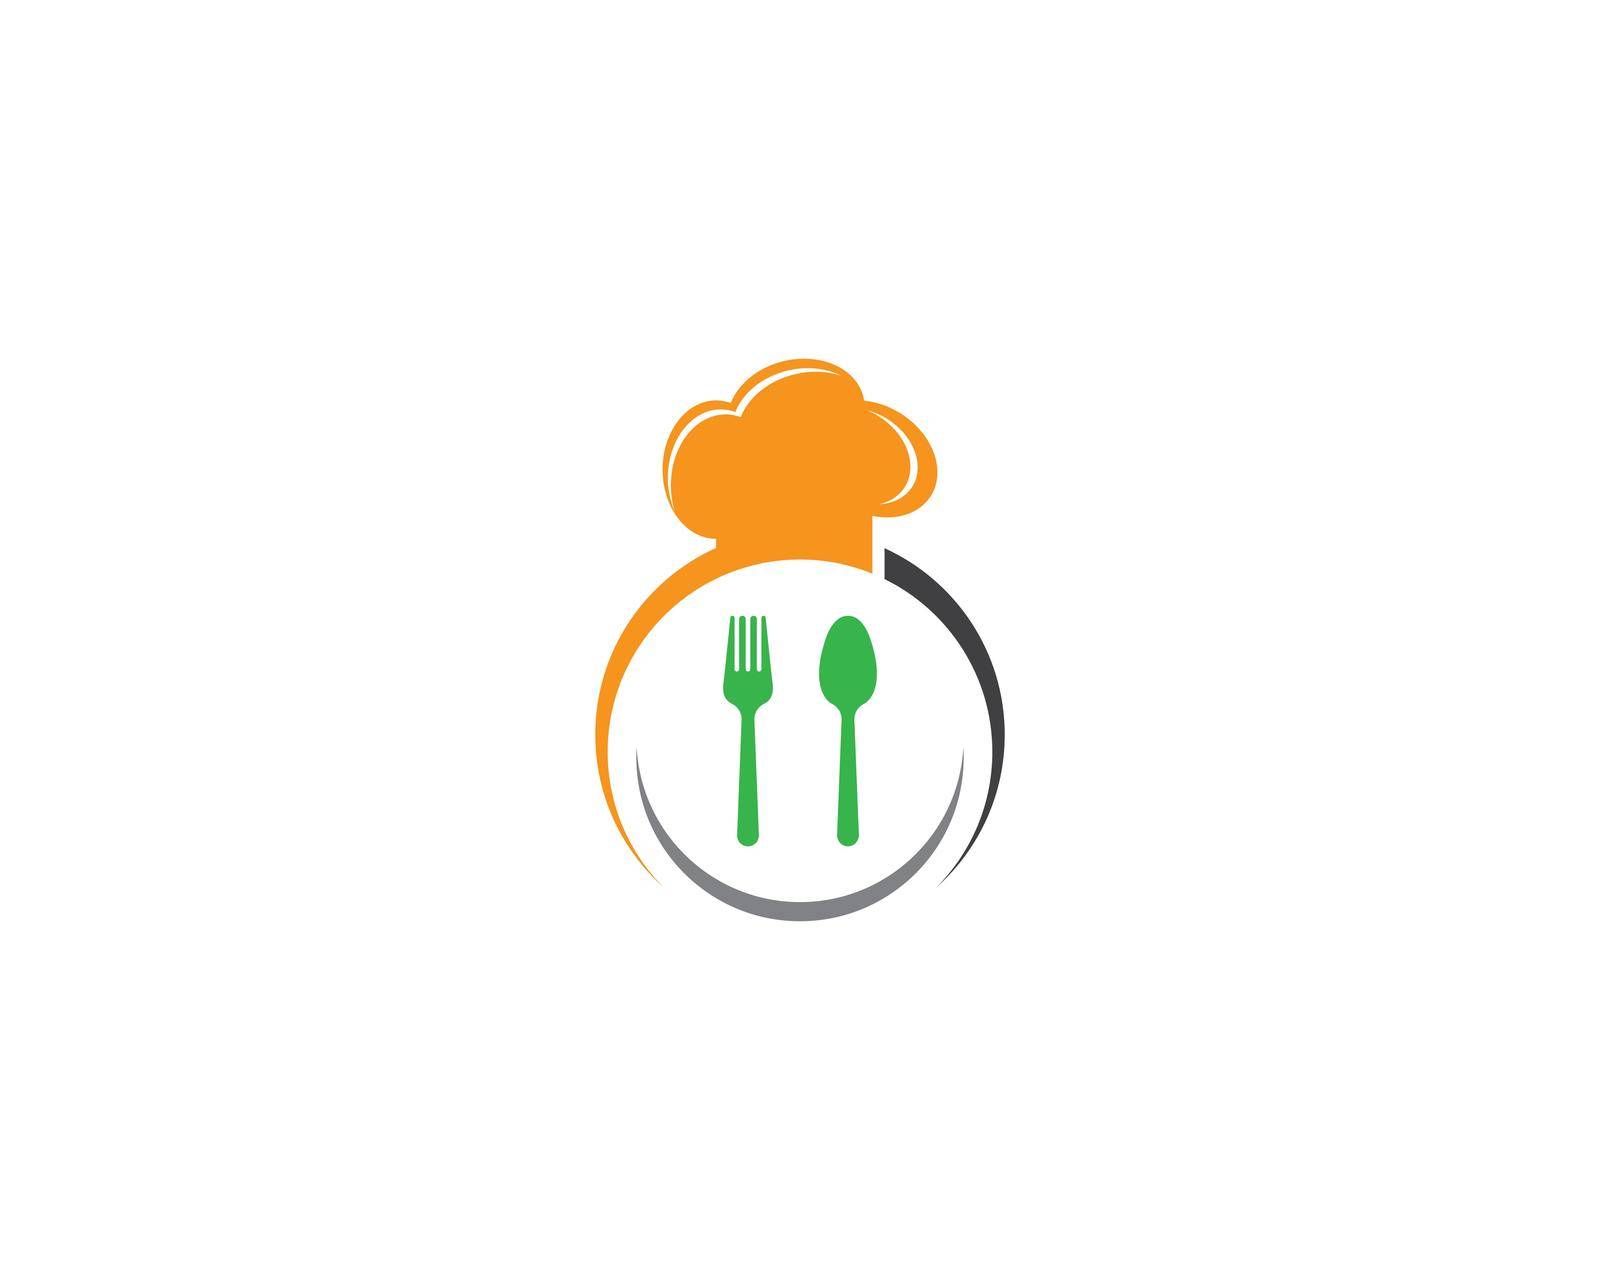 Spoon and fork vector icon by Fat17